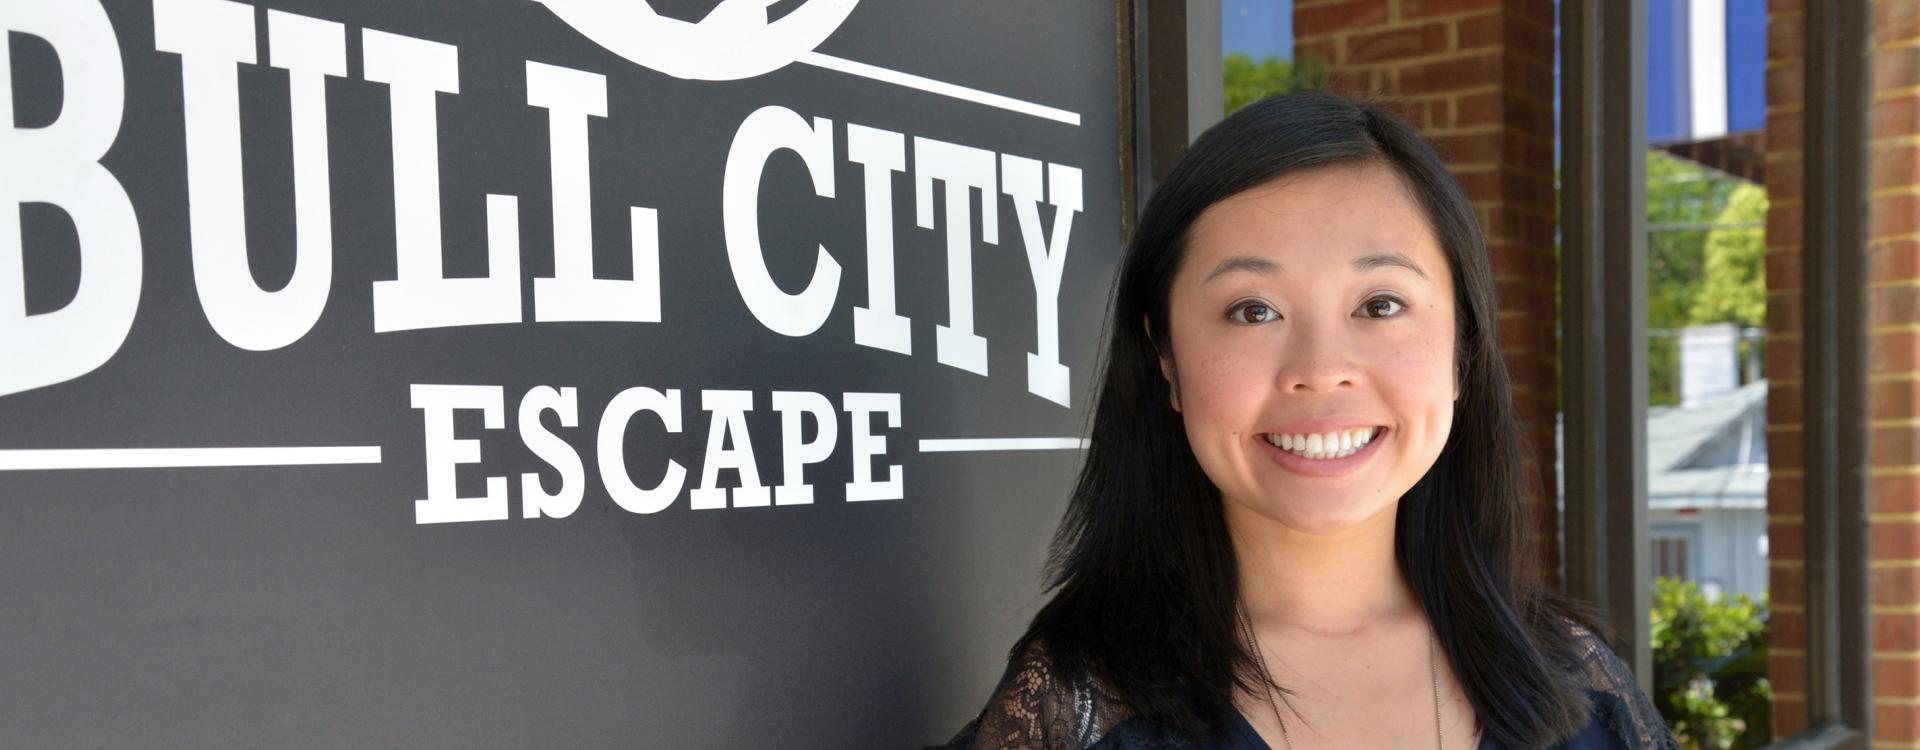 female business owner stands in front of Bull City Escape sign